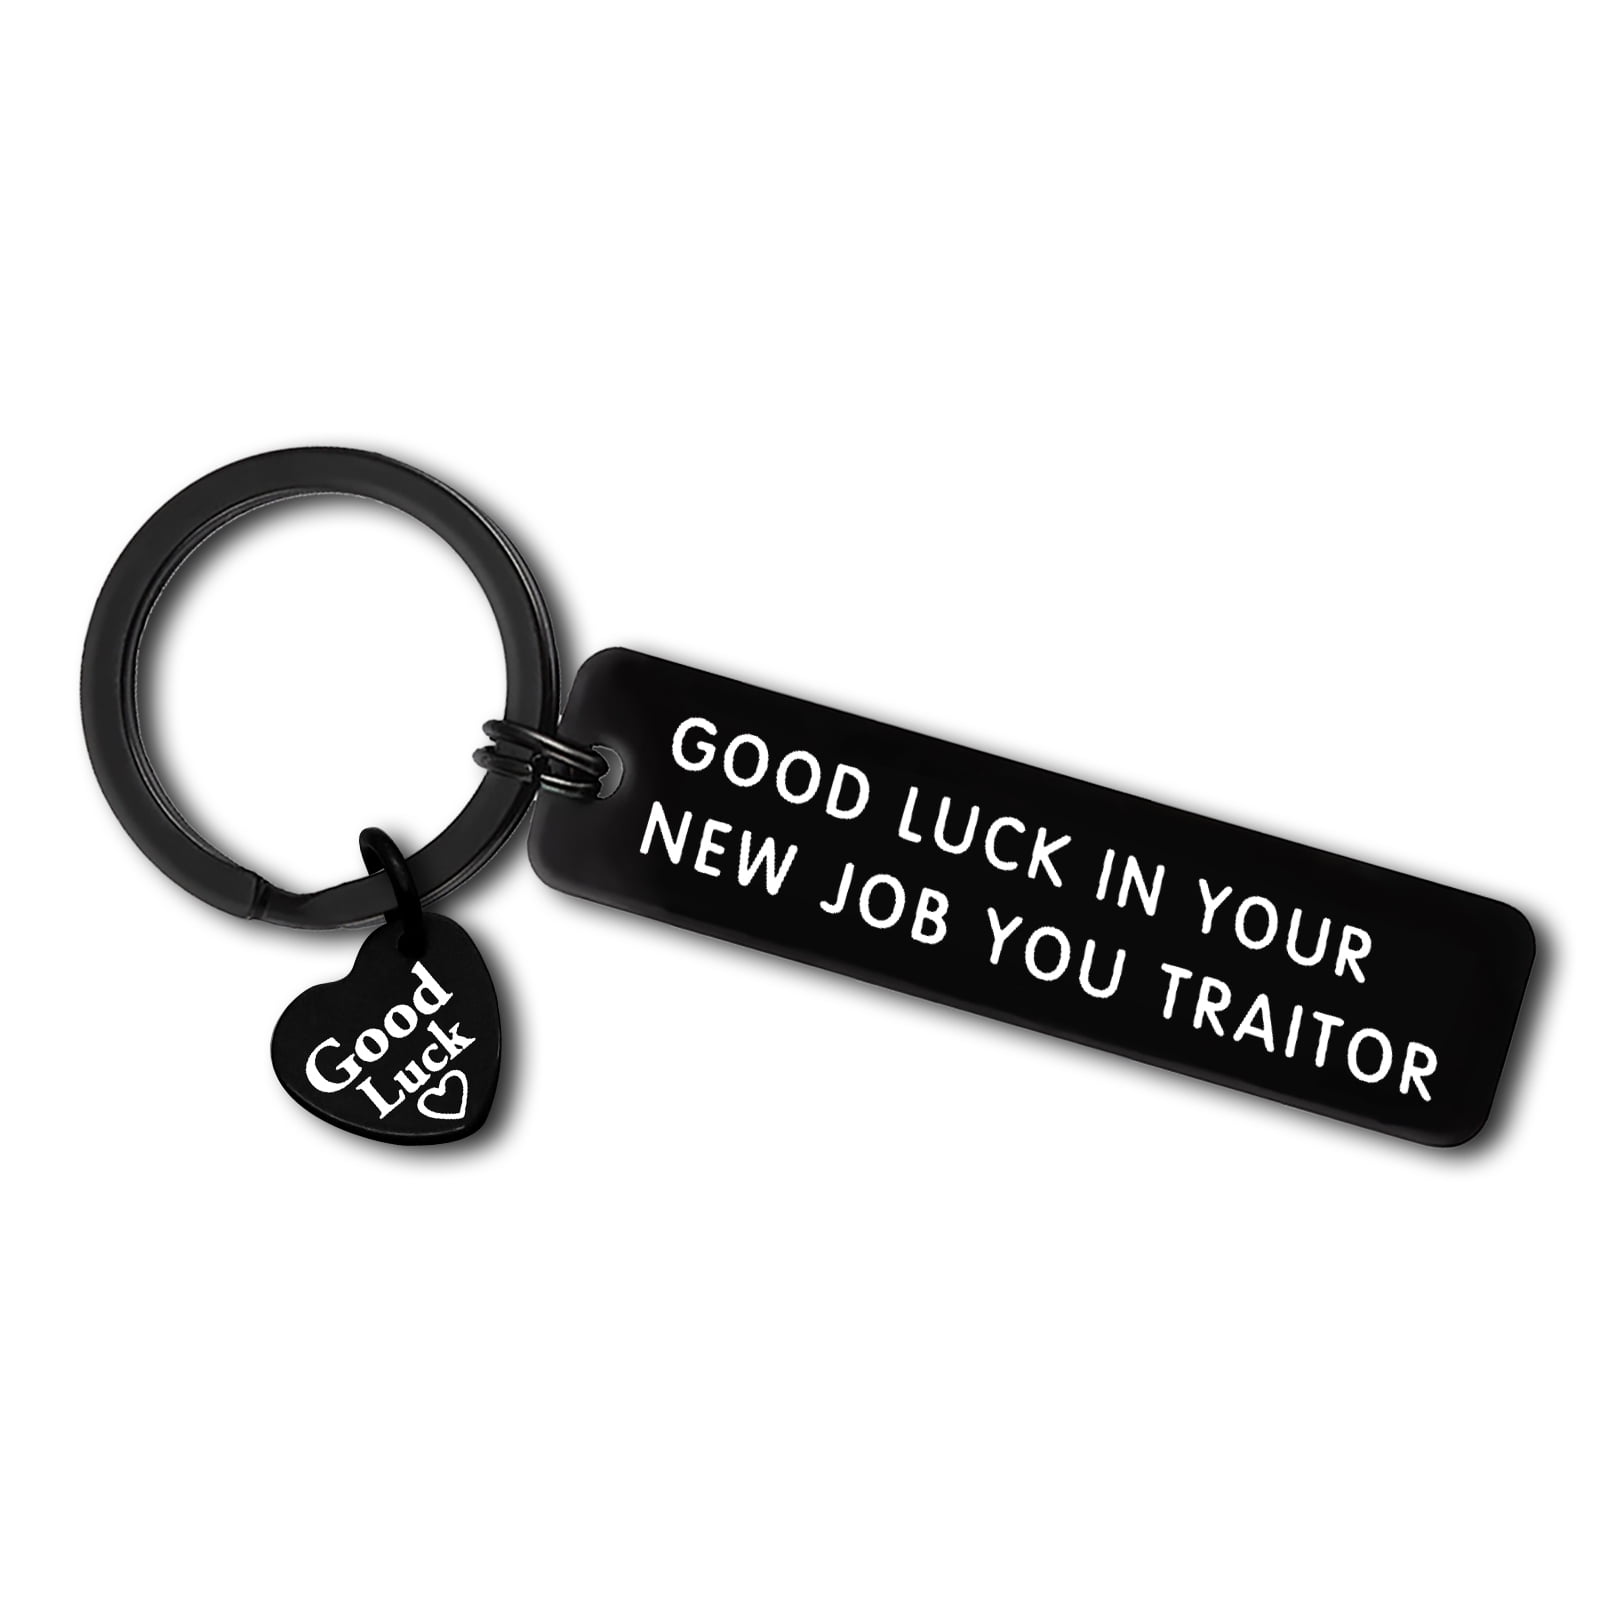 New Job Gift Coworker Moving Away Gift Coworker Goodbye Farewell Gift for Coworker Leaving Gift Boss Jewelry Coworker Retirement Jewelry Coworker Leaving Keychain Coworker Leaving Keyring 